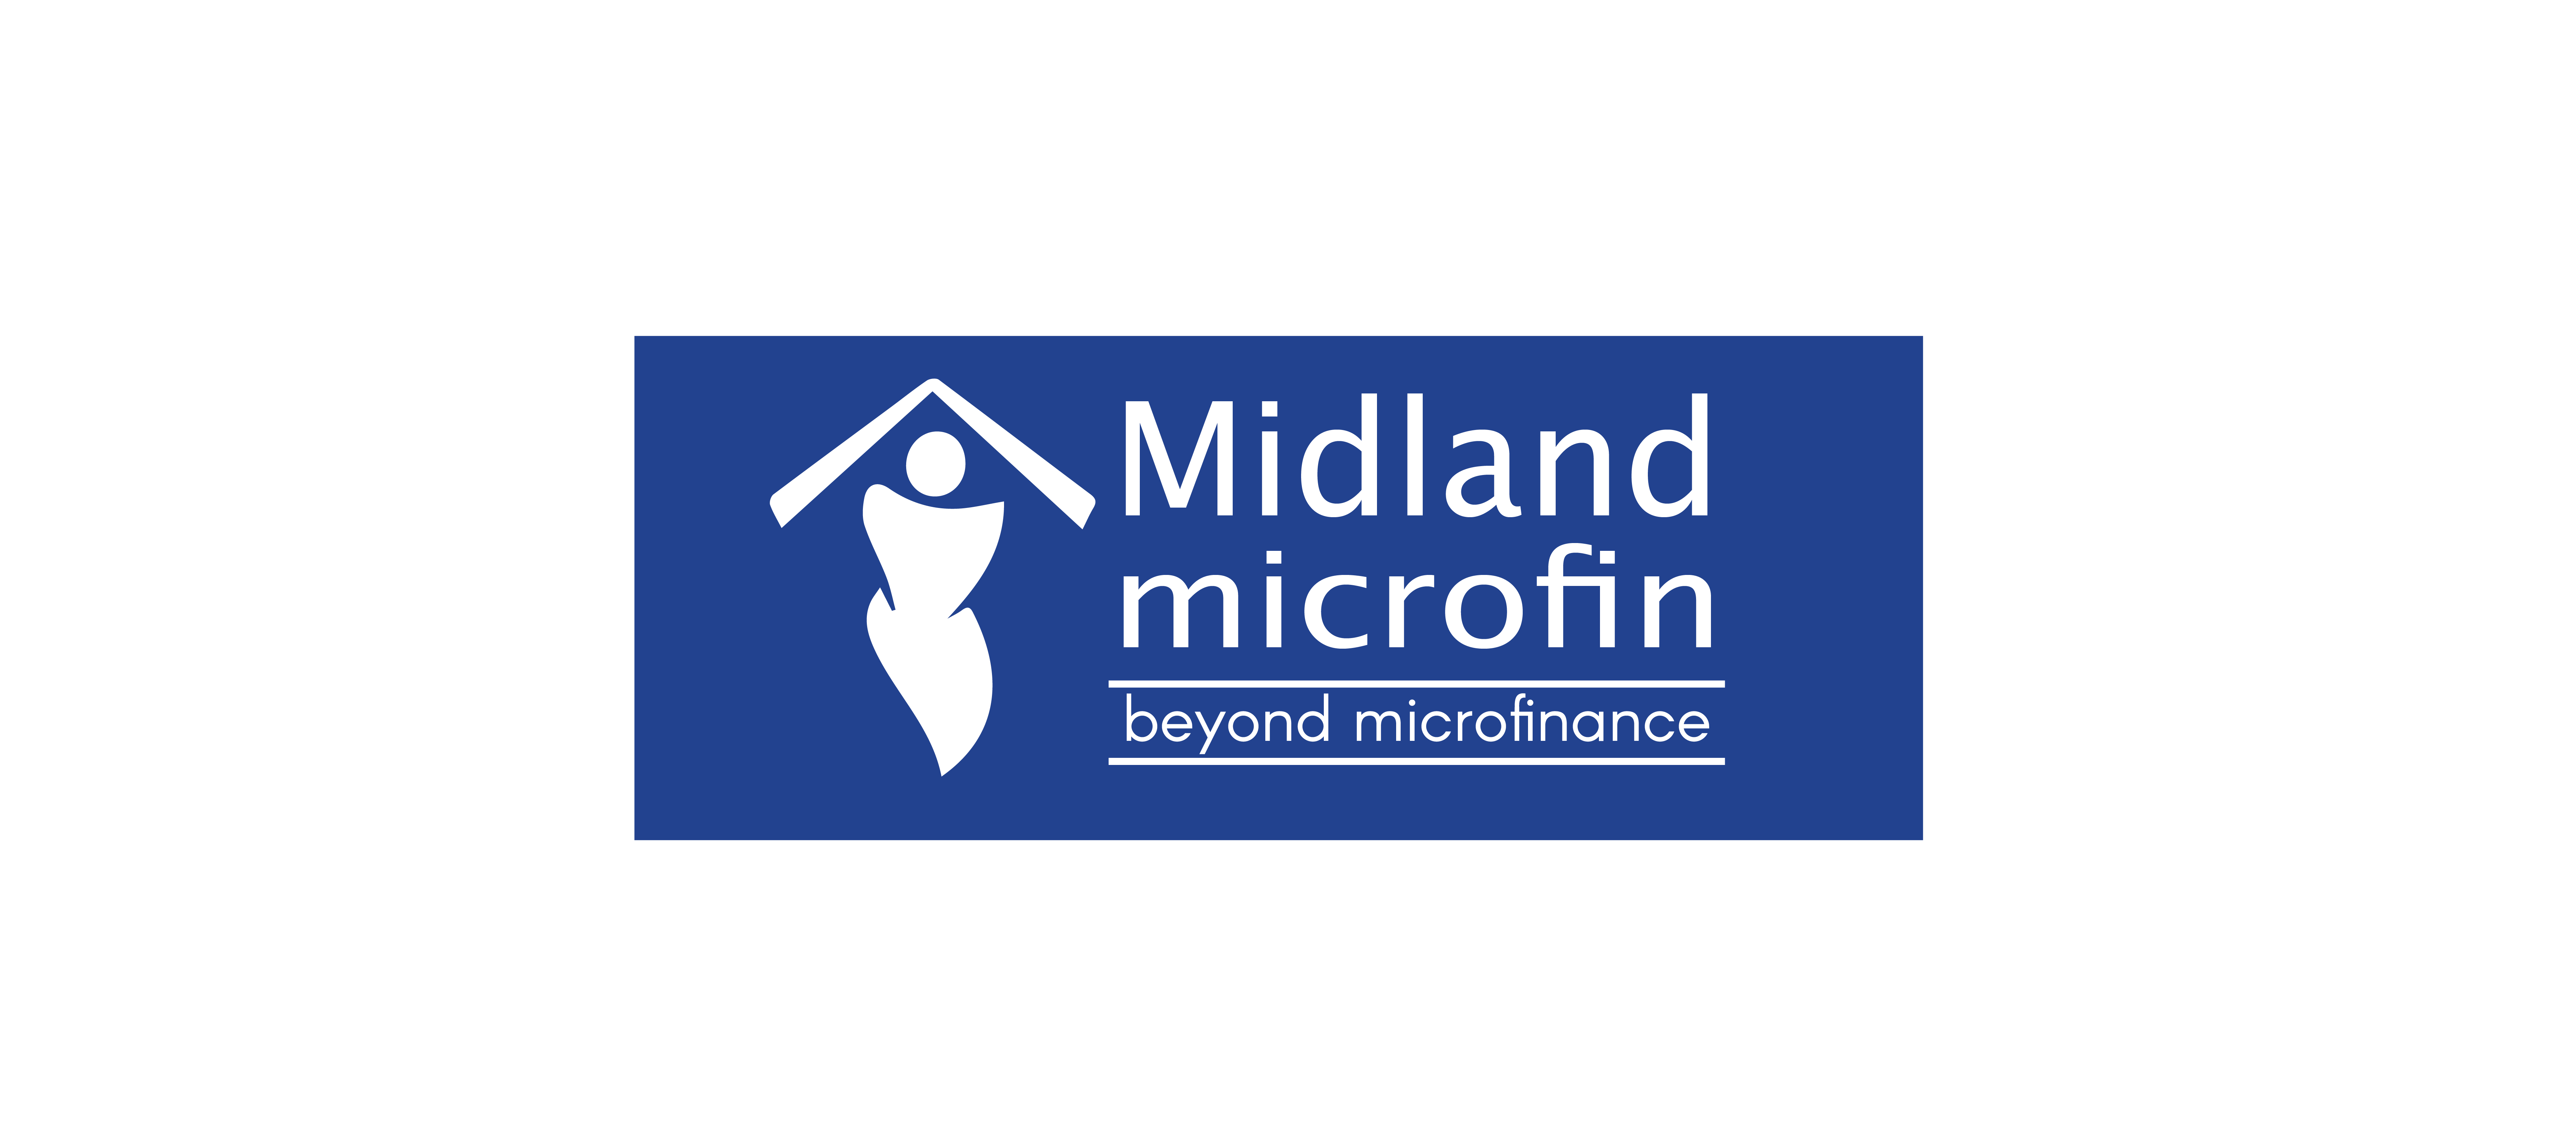 You are currently viewing Midland Microfin Ltd: An Investor’s Guide to Company Insights, Financials, and Share Valuations